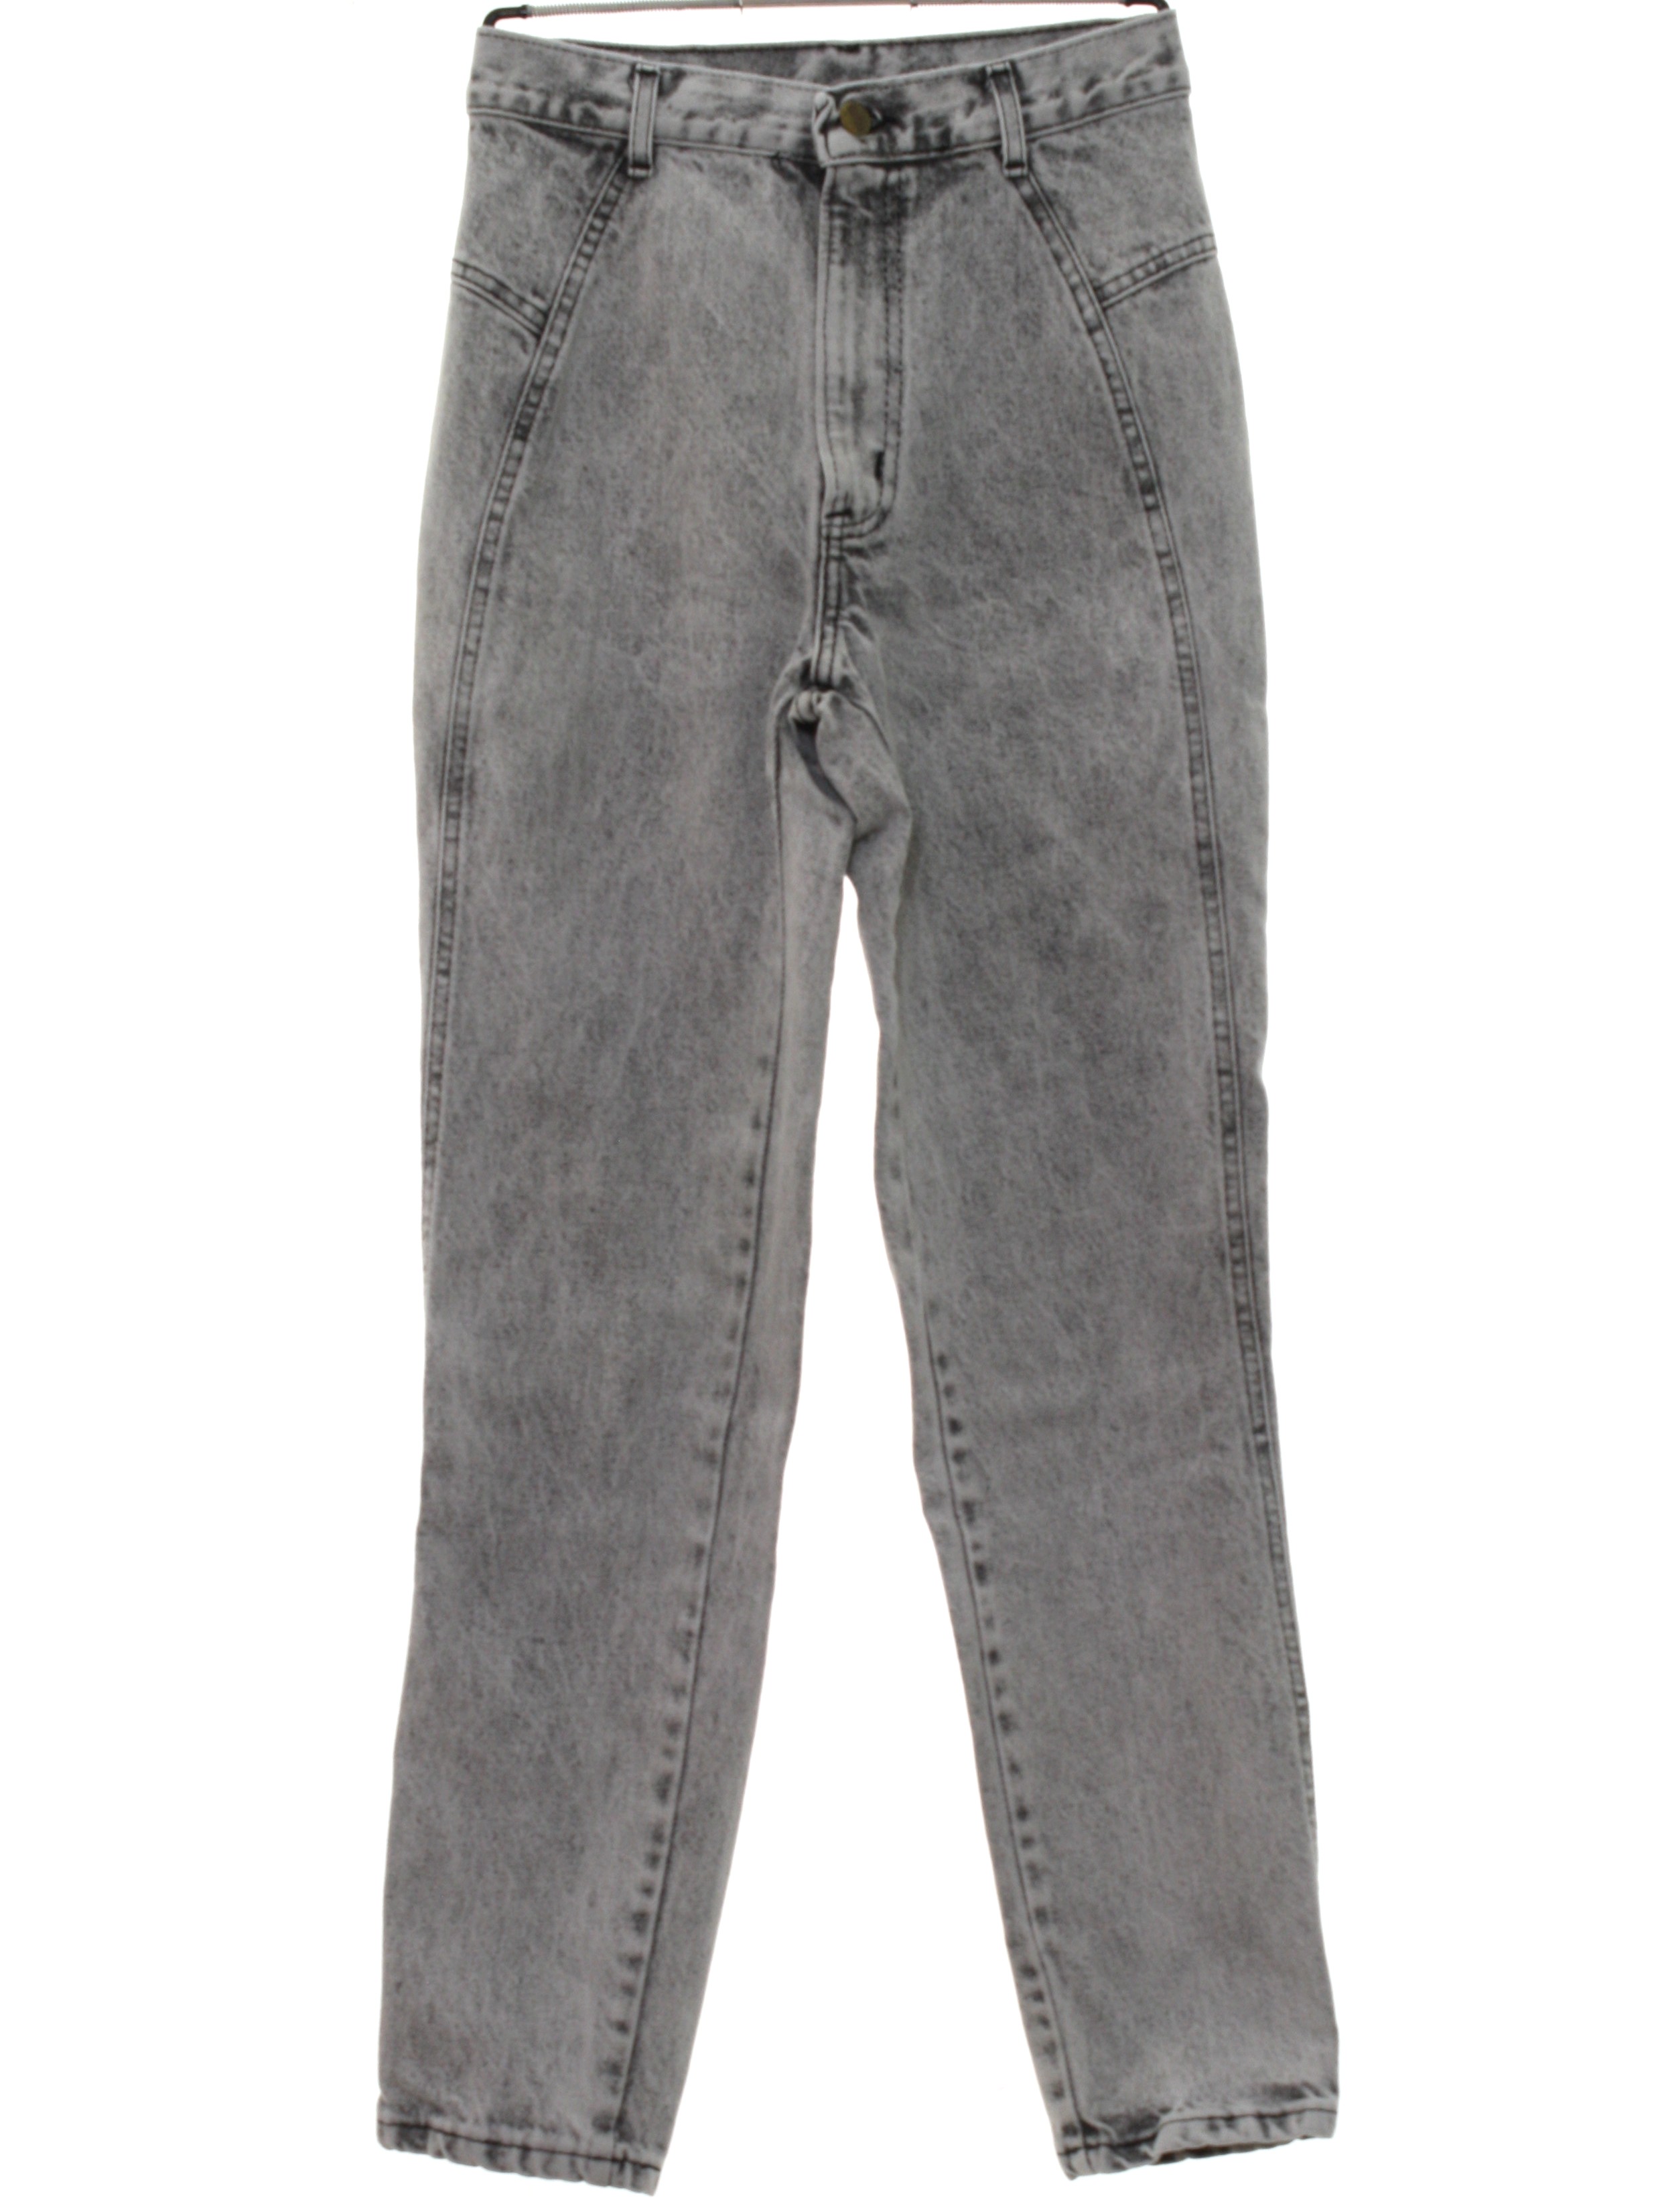 80s Pants (Chic): 80s -Chic- Womens light grey acid washed background ...